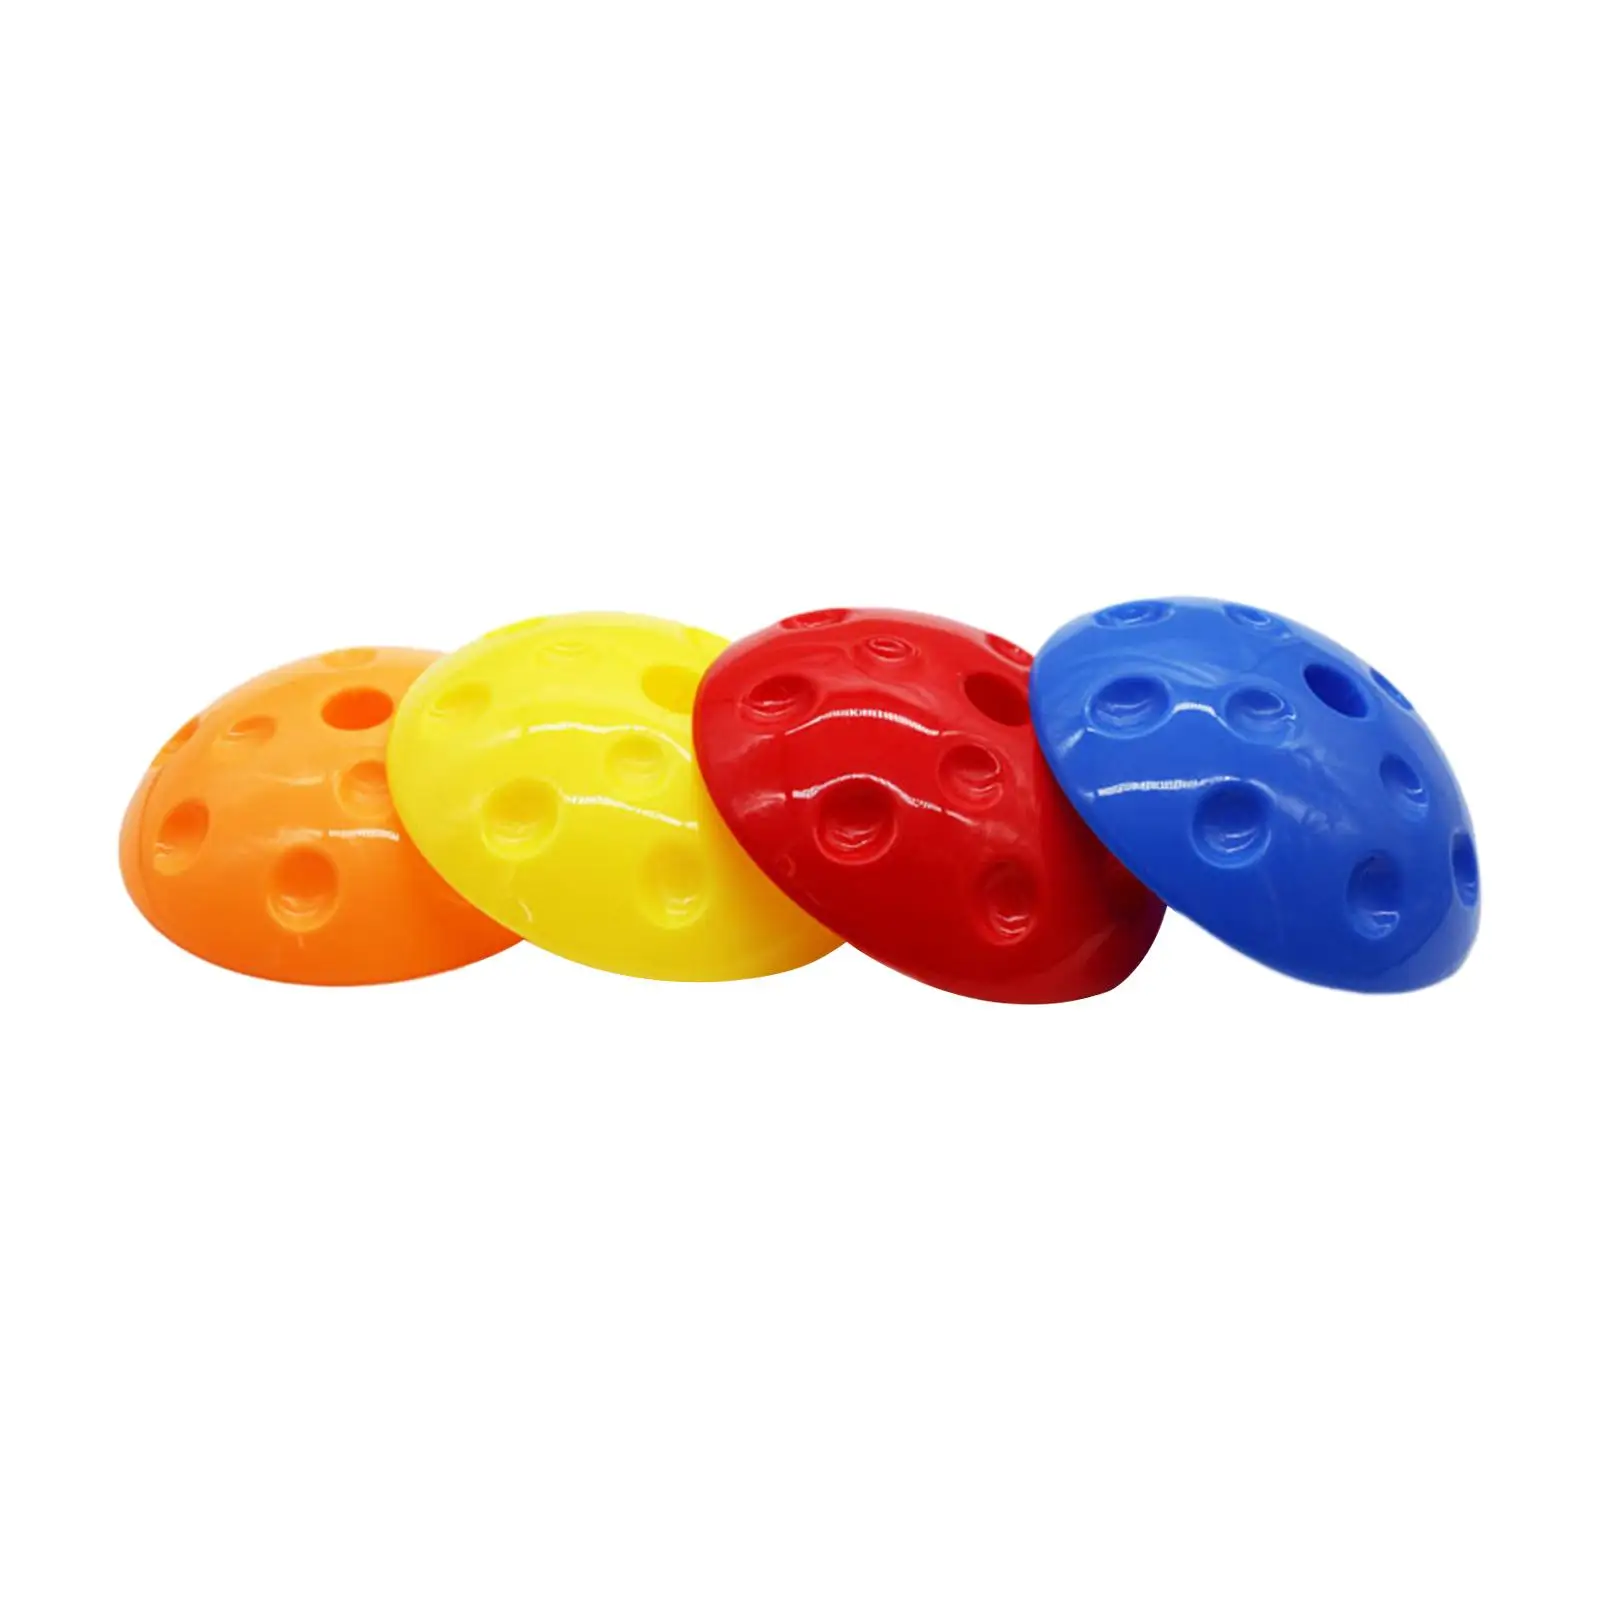 4 Pieces Kids Stepping Stones Crossing River Stone Toddlers Obstacle Course Step Toys Children Nonslip Balance River Stones